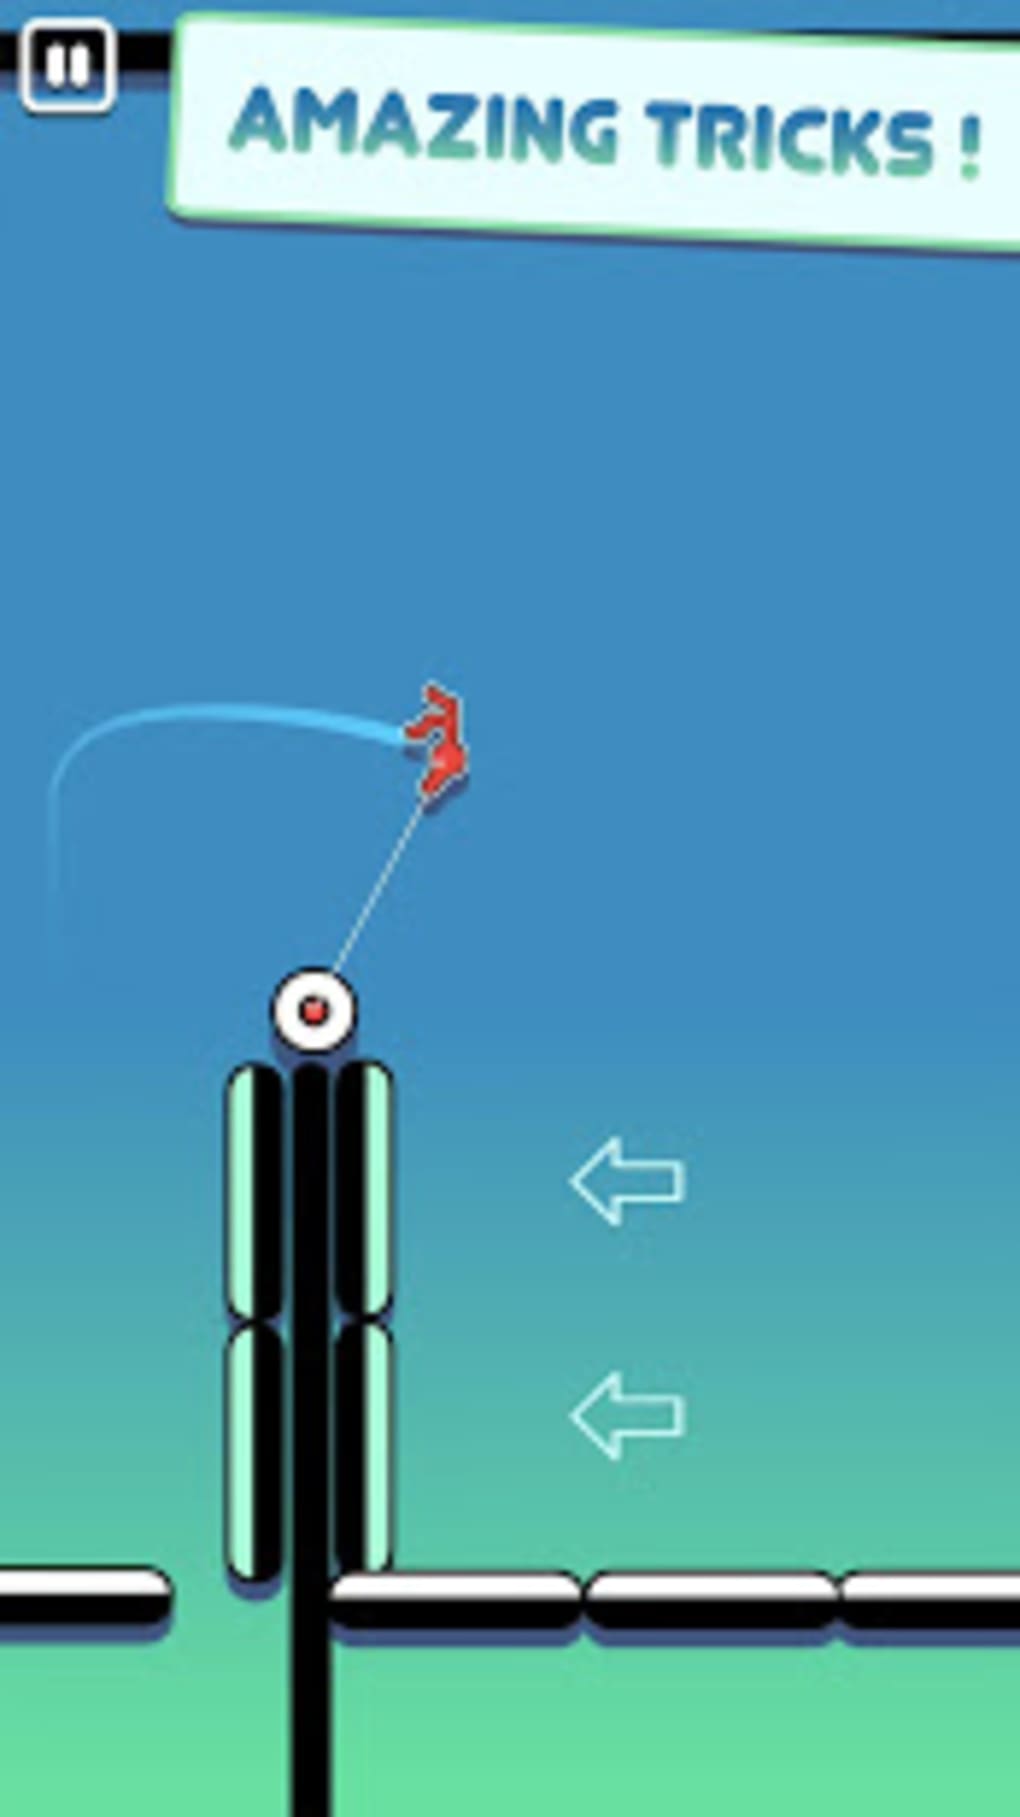 STICKMAN HOOK - Play Online for Free!